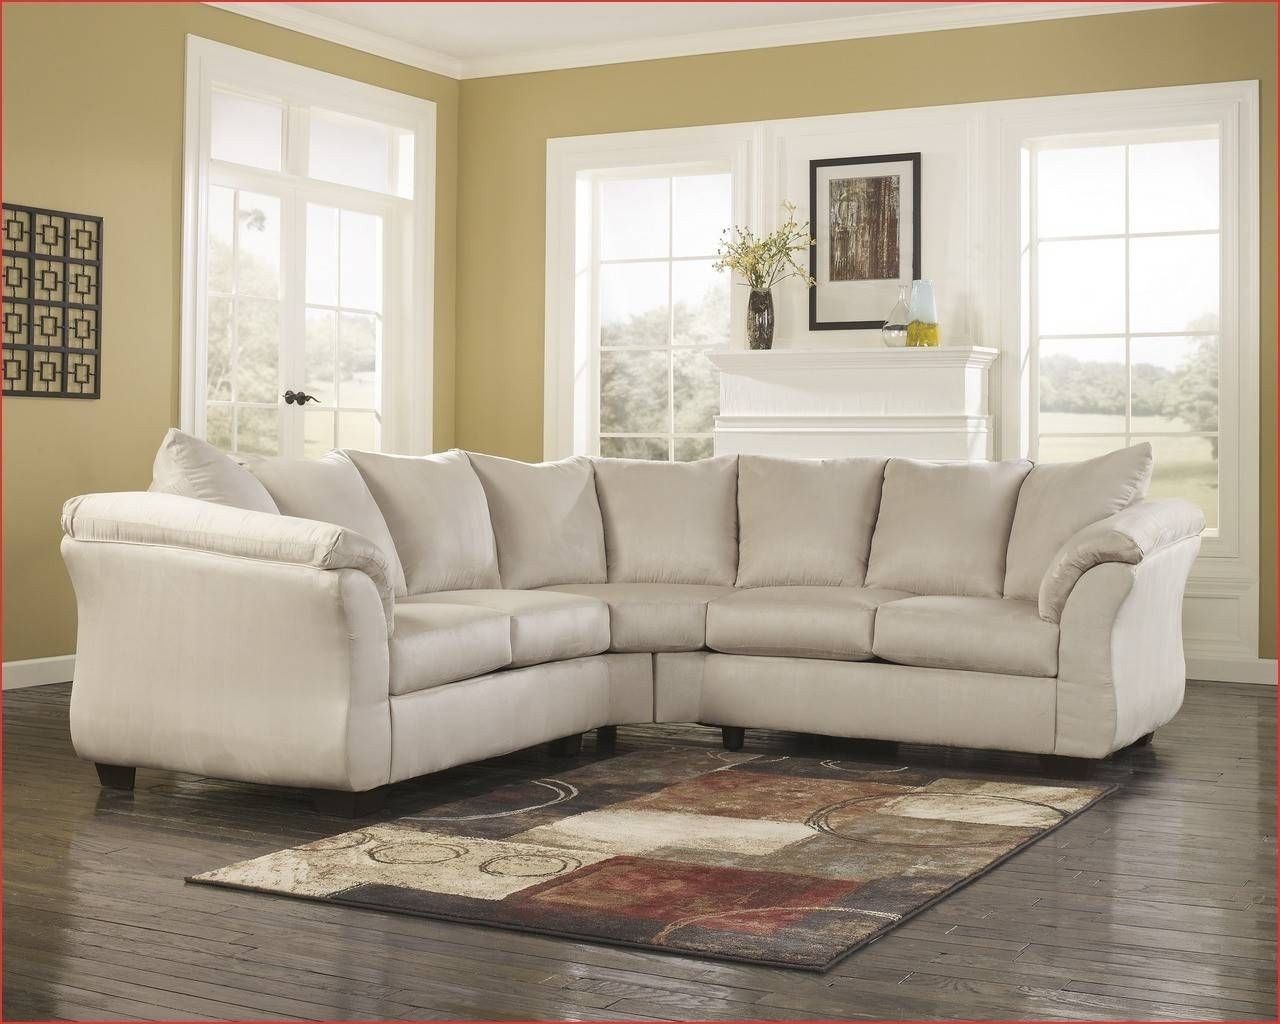 Collection Sectional Sofas Rochester Ny – Mediasupload With Regard To Rochester Ny Sectional Sofas (Photo 1 of 10)